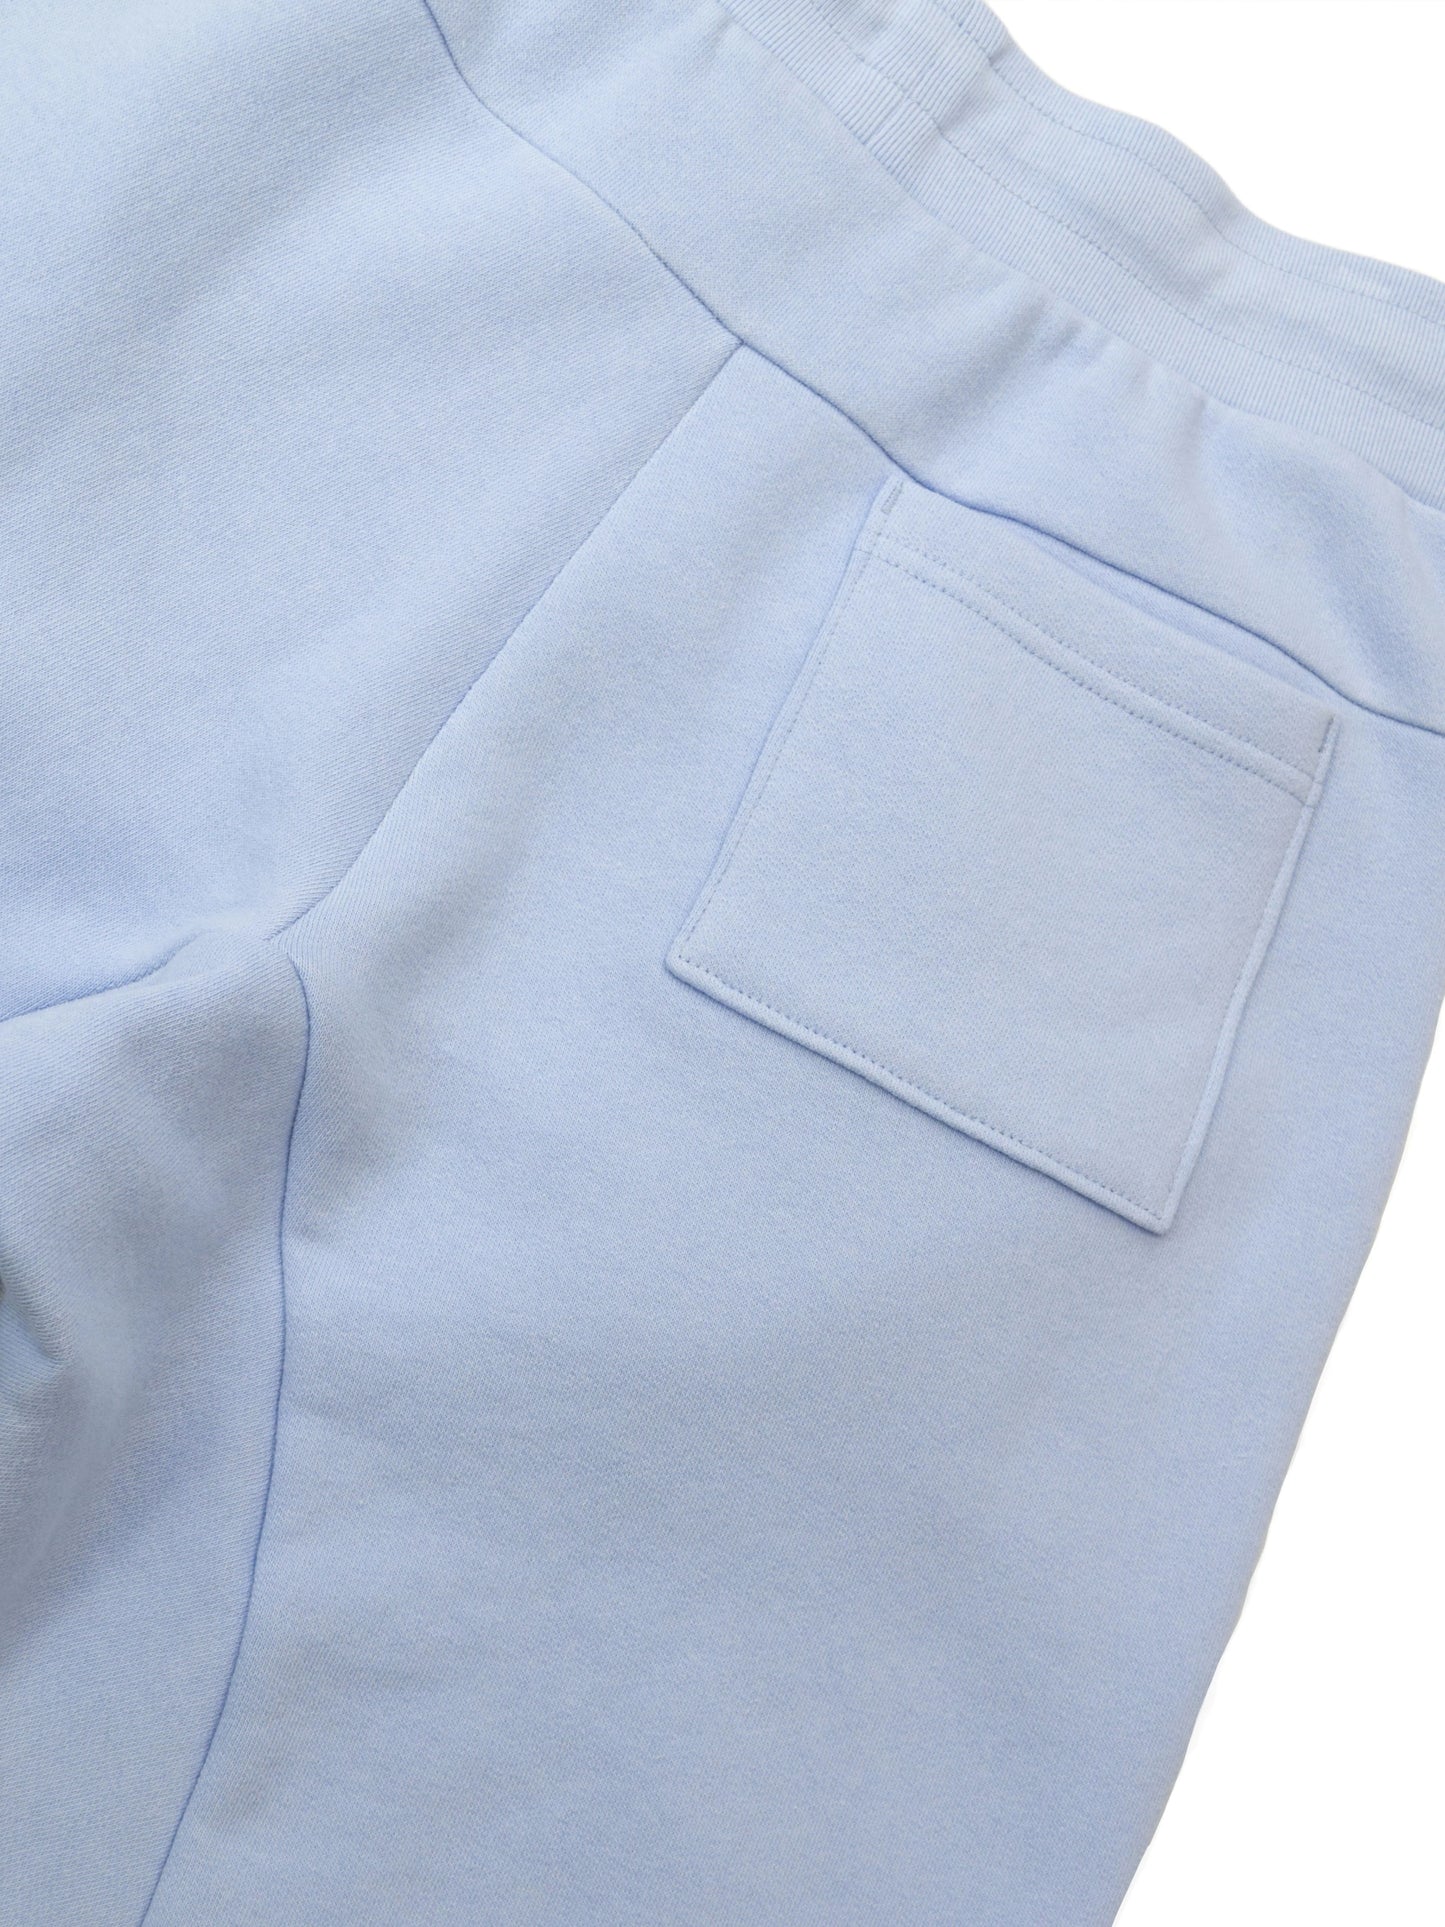 Back pocket and inseams of joggers in airy blue.